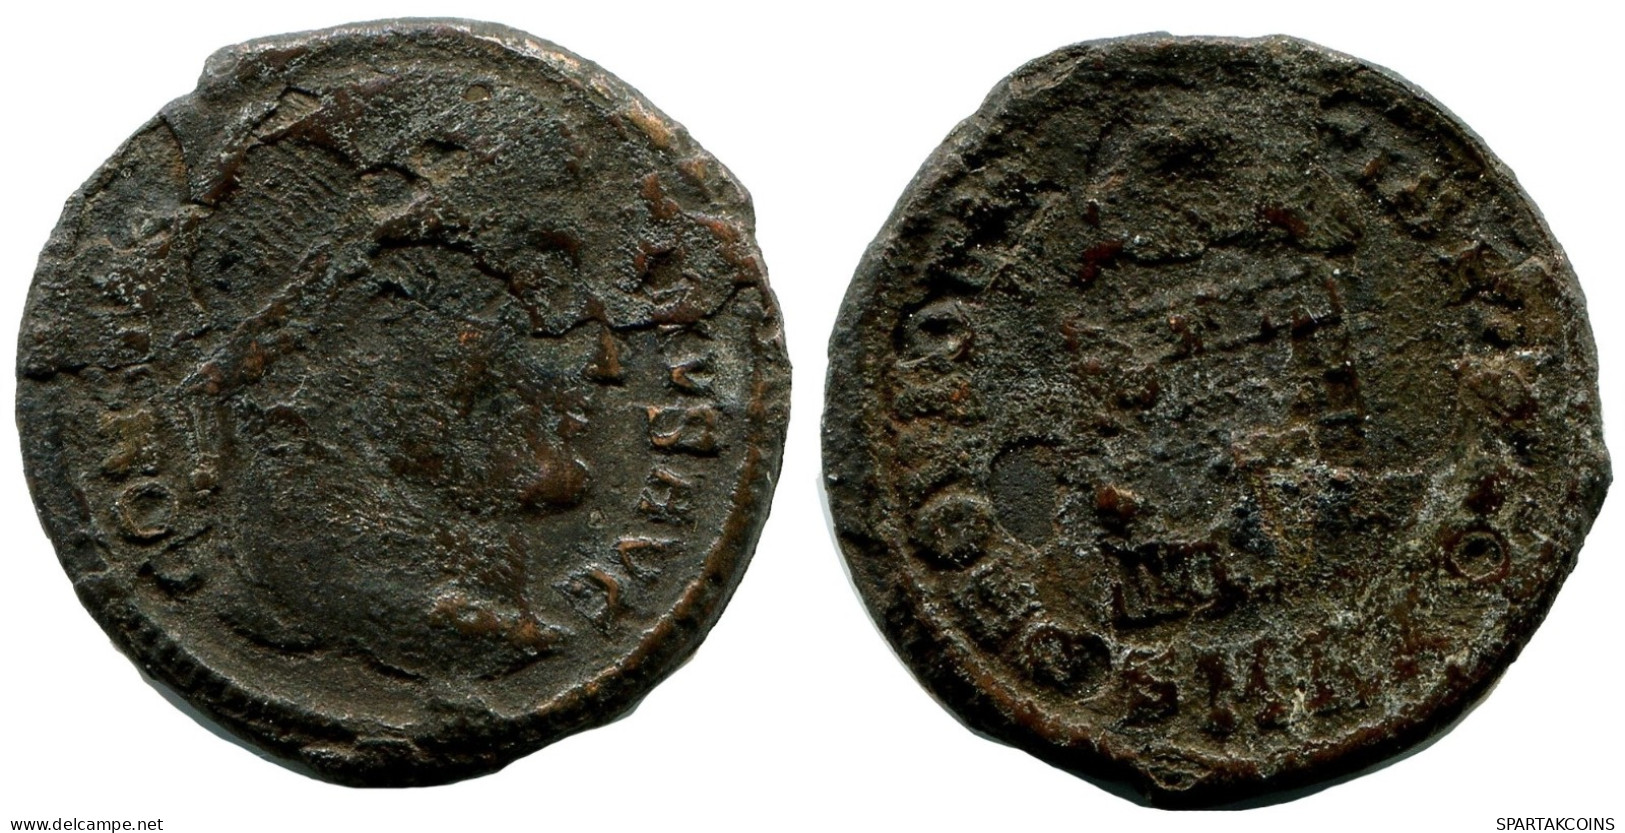 CONSTANTINE I MINTED IN CYZICUS FOUND IN IHNASYAH HOARD EGYPT #ANC11029.14.D.A - El Imperio Christiano (307 / 363)